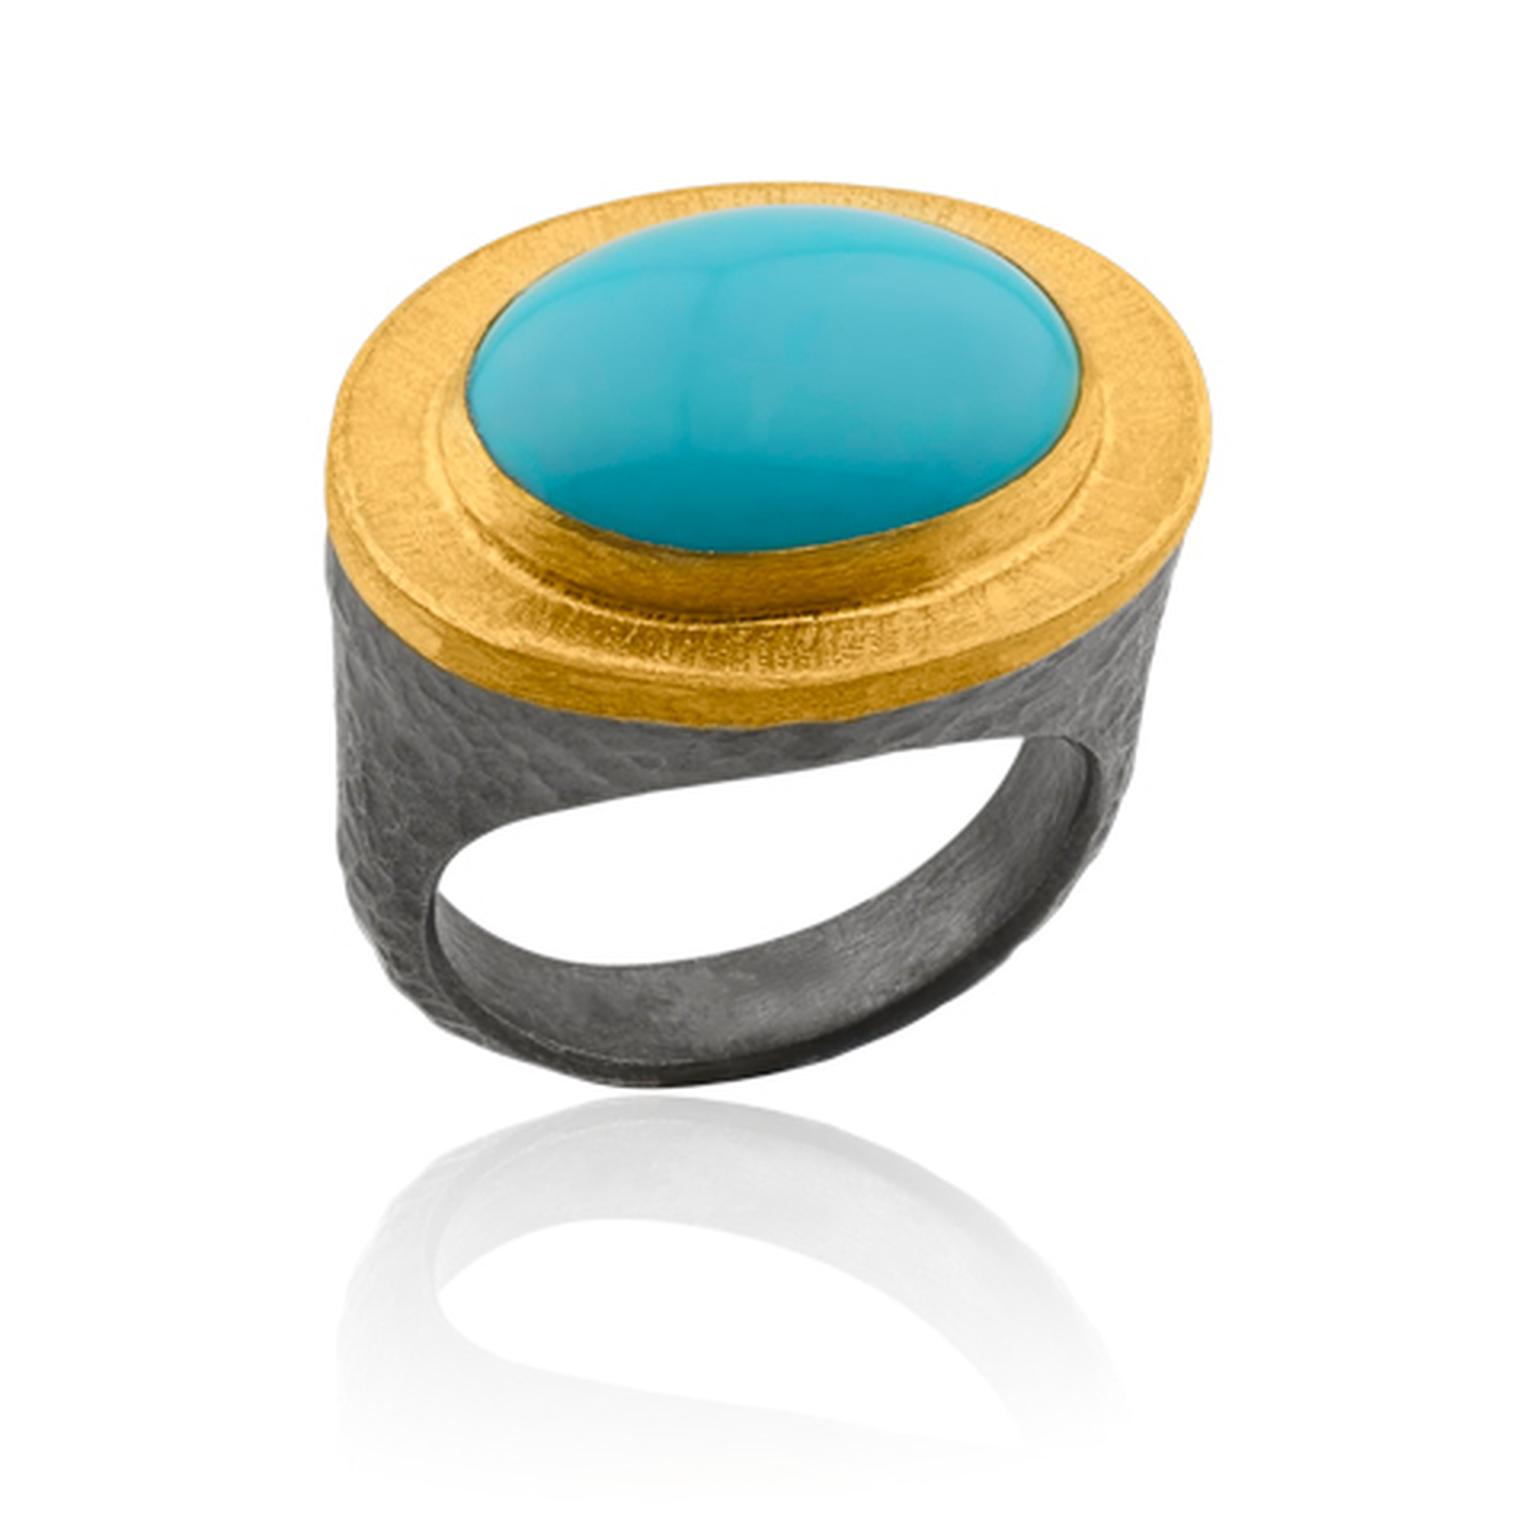 Lika Behar cabochon turquoise ring in a collet setting of yellow gold and silver.